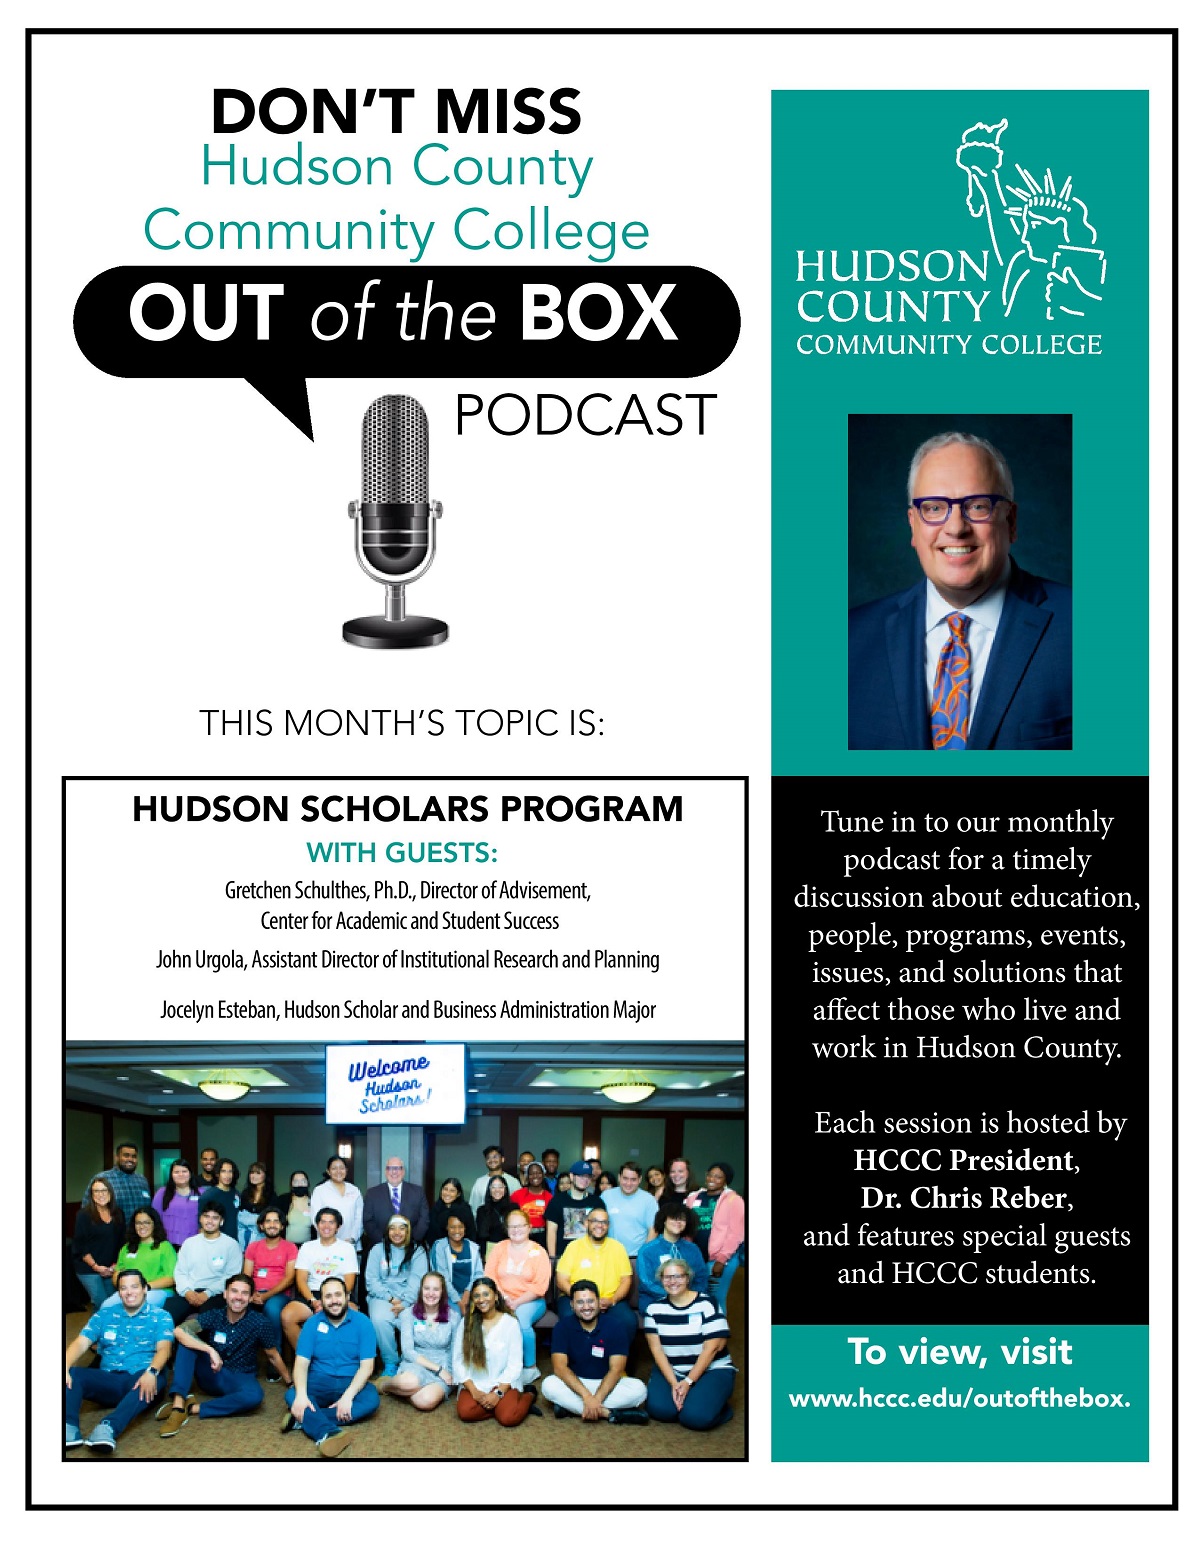 Out of the Box - Hudson Scholars